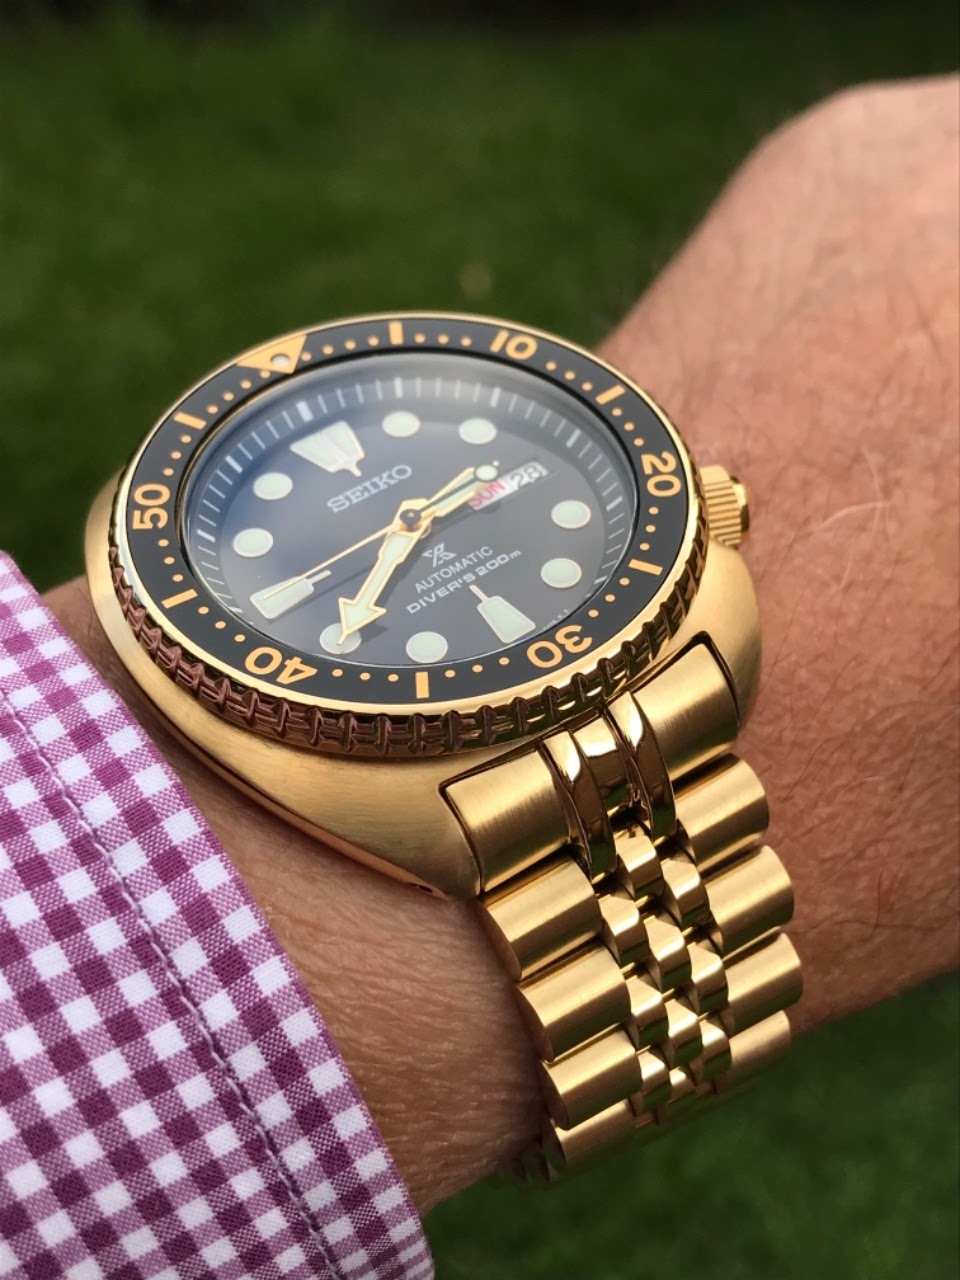 Seiko - Just for the pleasure of sharing a few shots of my golden Turtle...